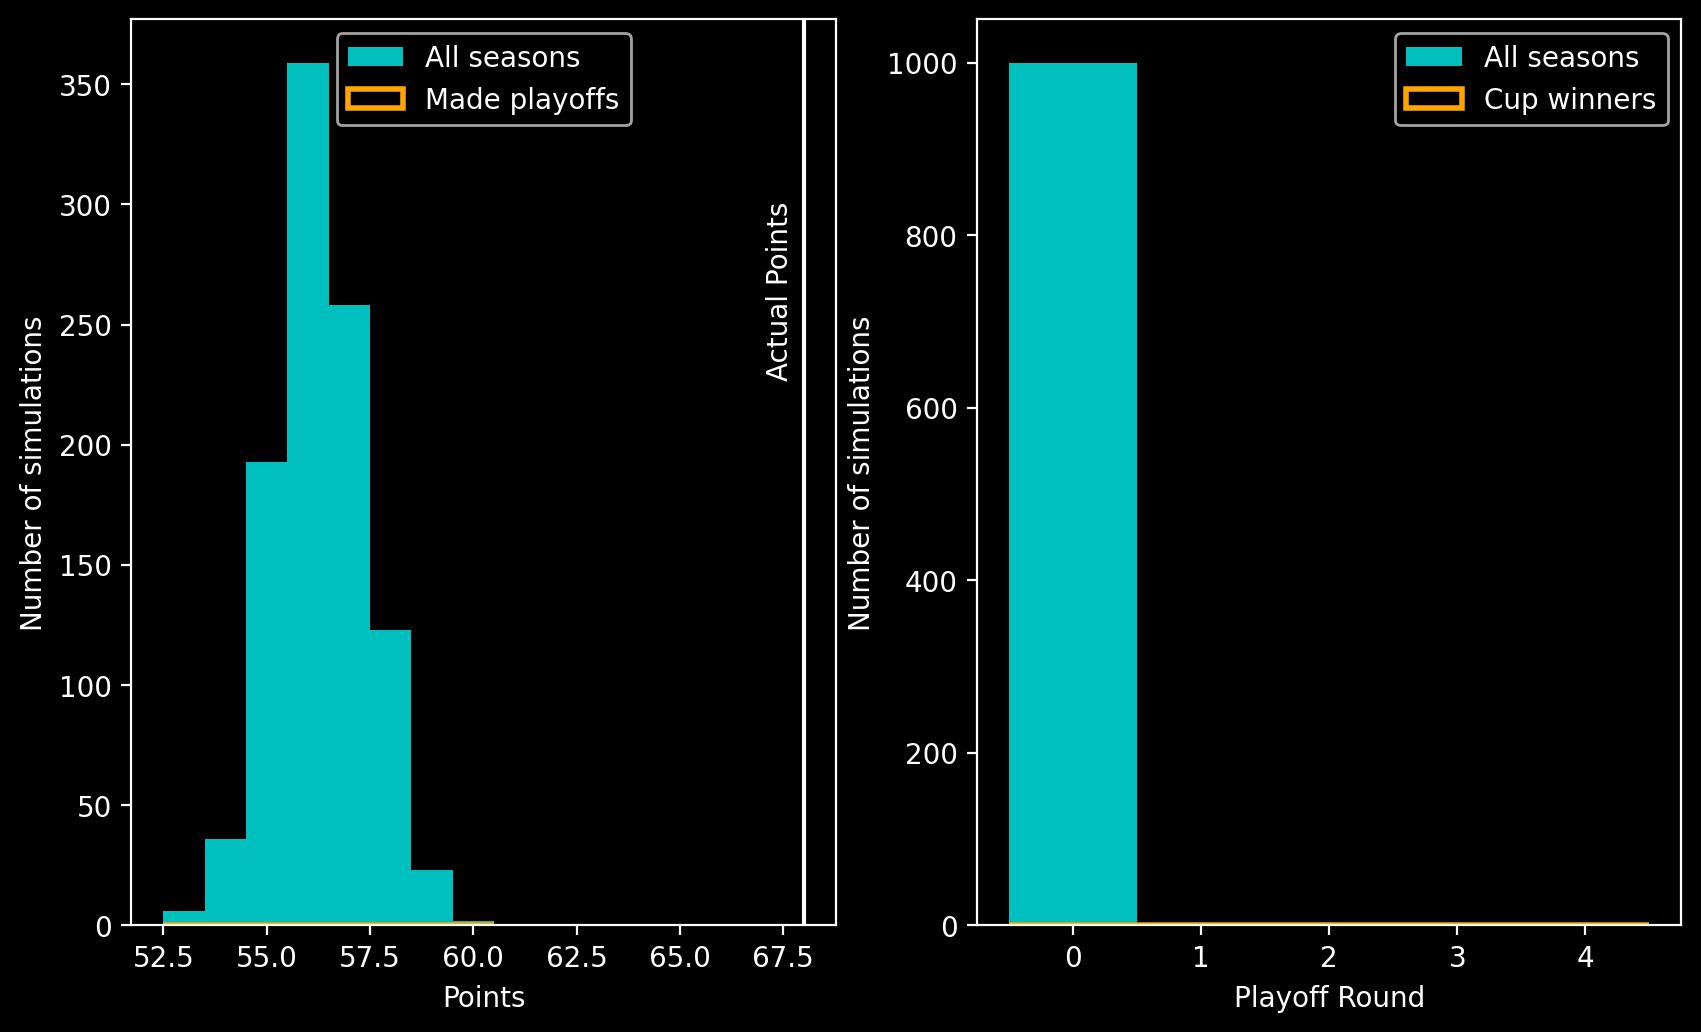 Two panel plot showing histograms. Left panel shows a histogram of points on the x-axis against number of simulations on the y-axis, the peak is at 56 points. Right panel shows playoff round on the x-axis against number of simulations on the y-axis. The largest bar is at playoff round 0.